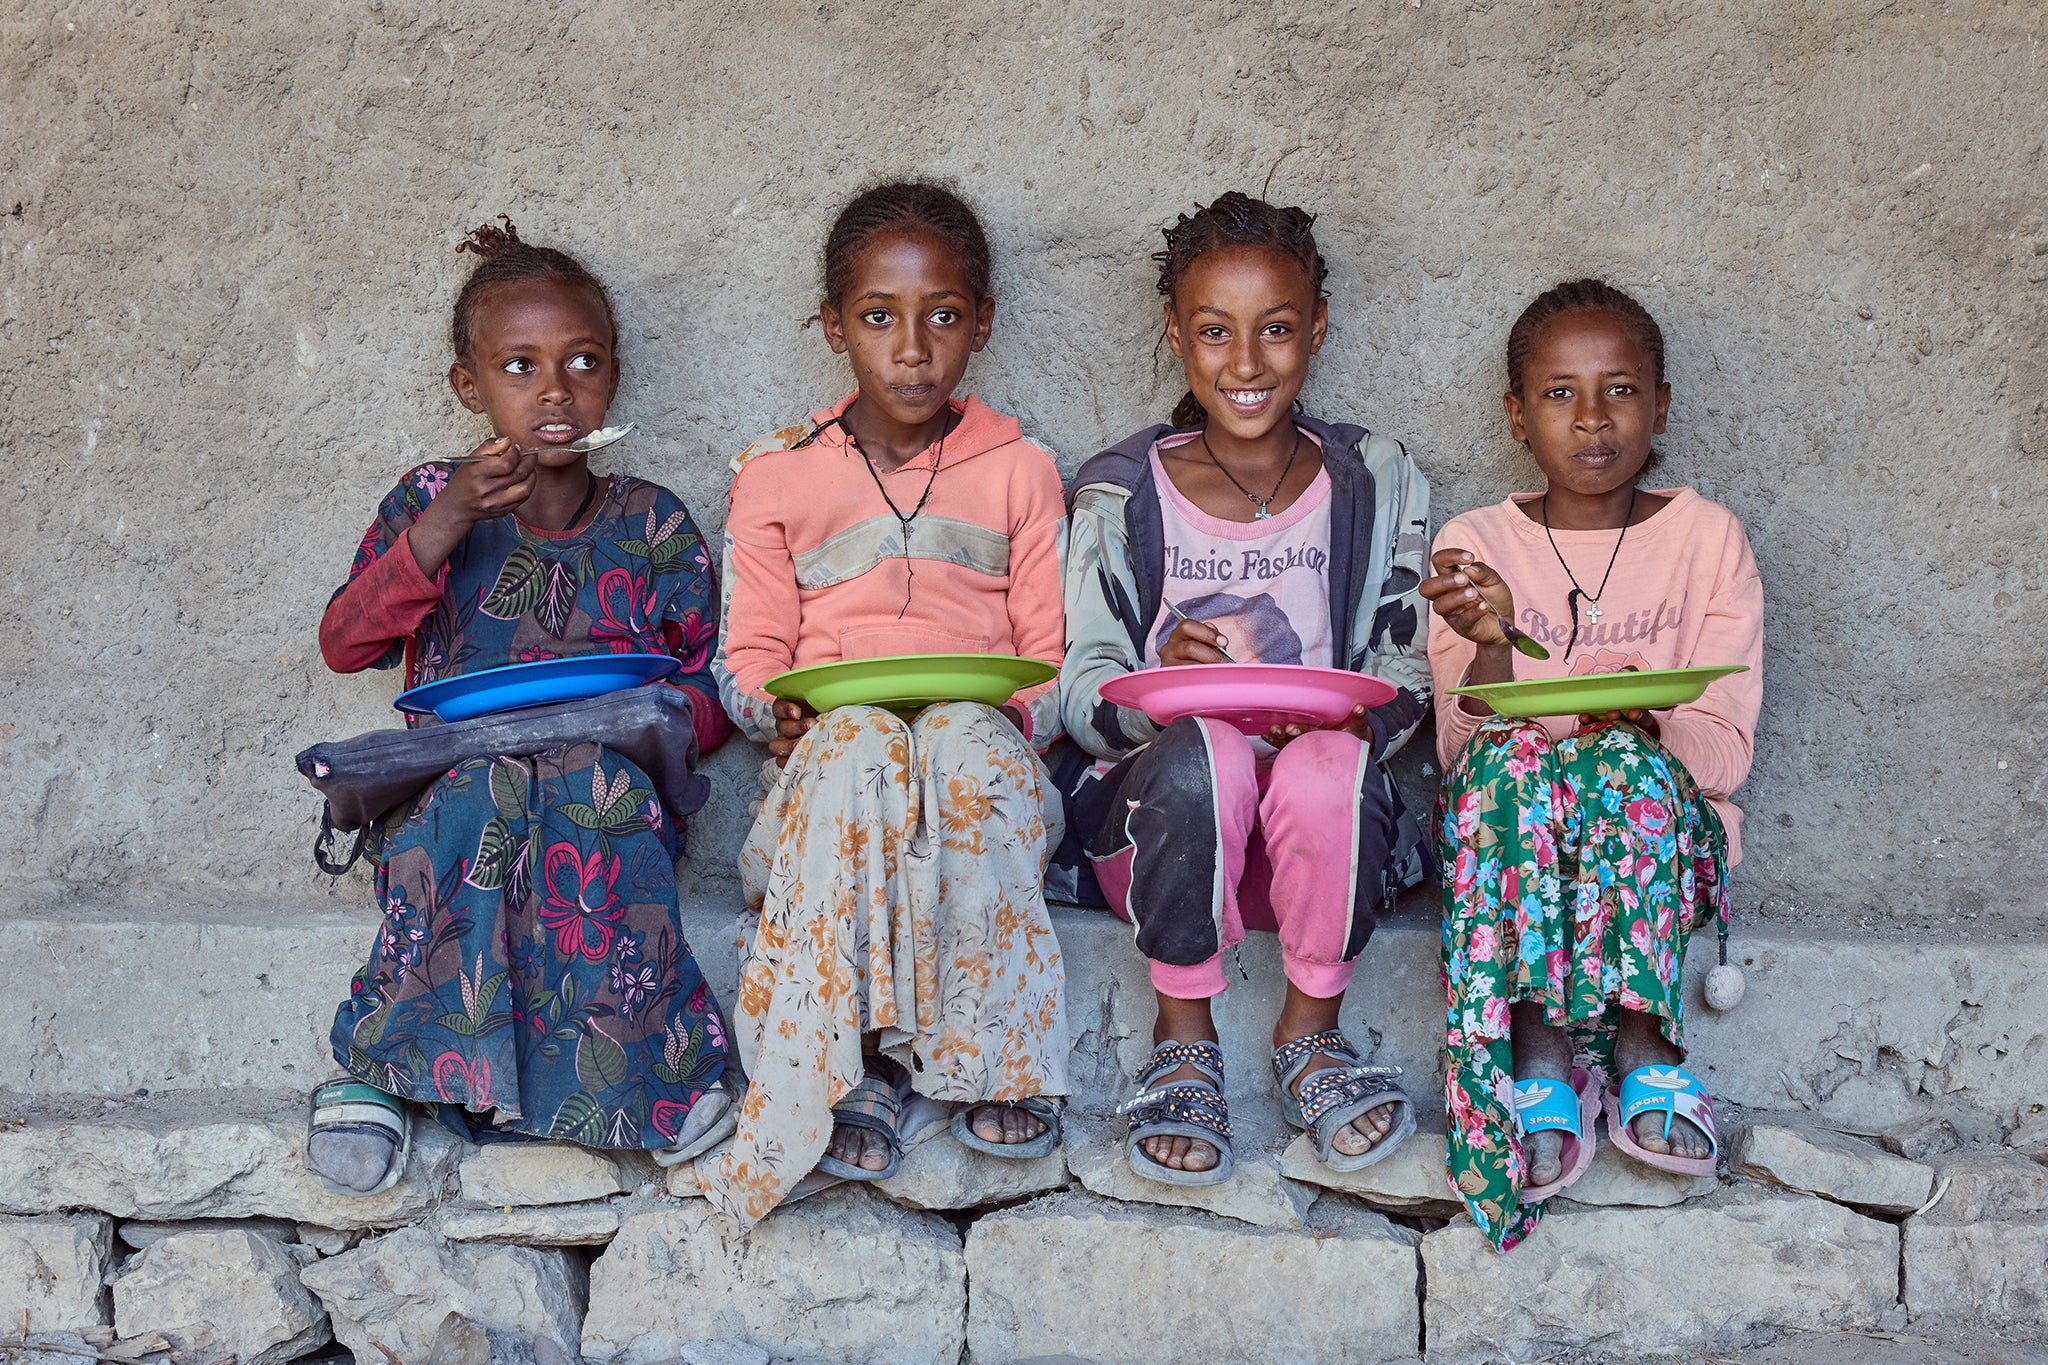 Children eating Mary’s Meals at Beati-Akor Primary School, Tigray, Ethiopia